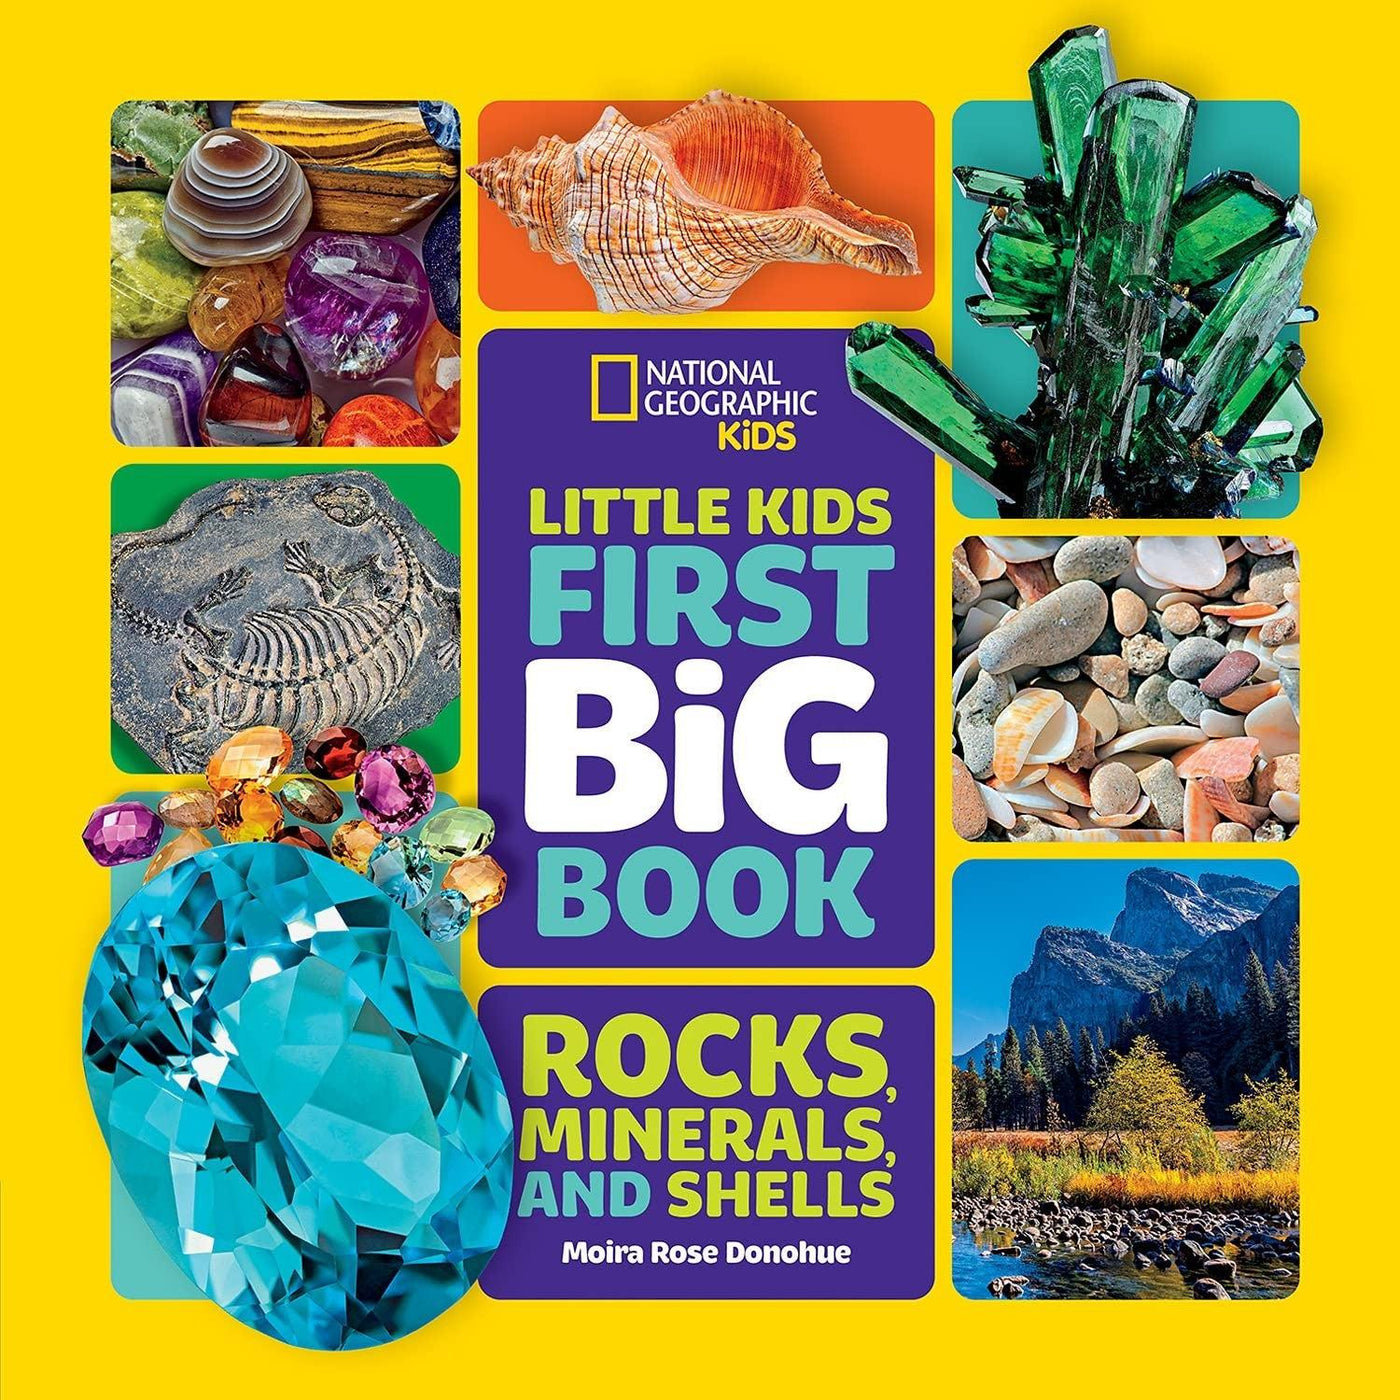 Little Kids First Big Book Of Rocks Minerals And Shells (National Geographic Kids) - Moira Rose Donohue